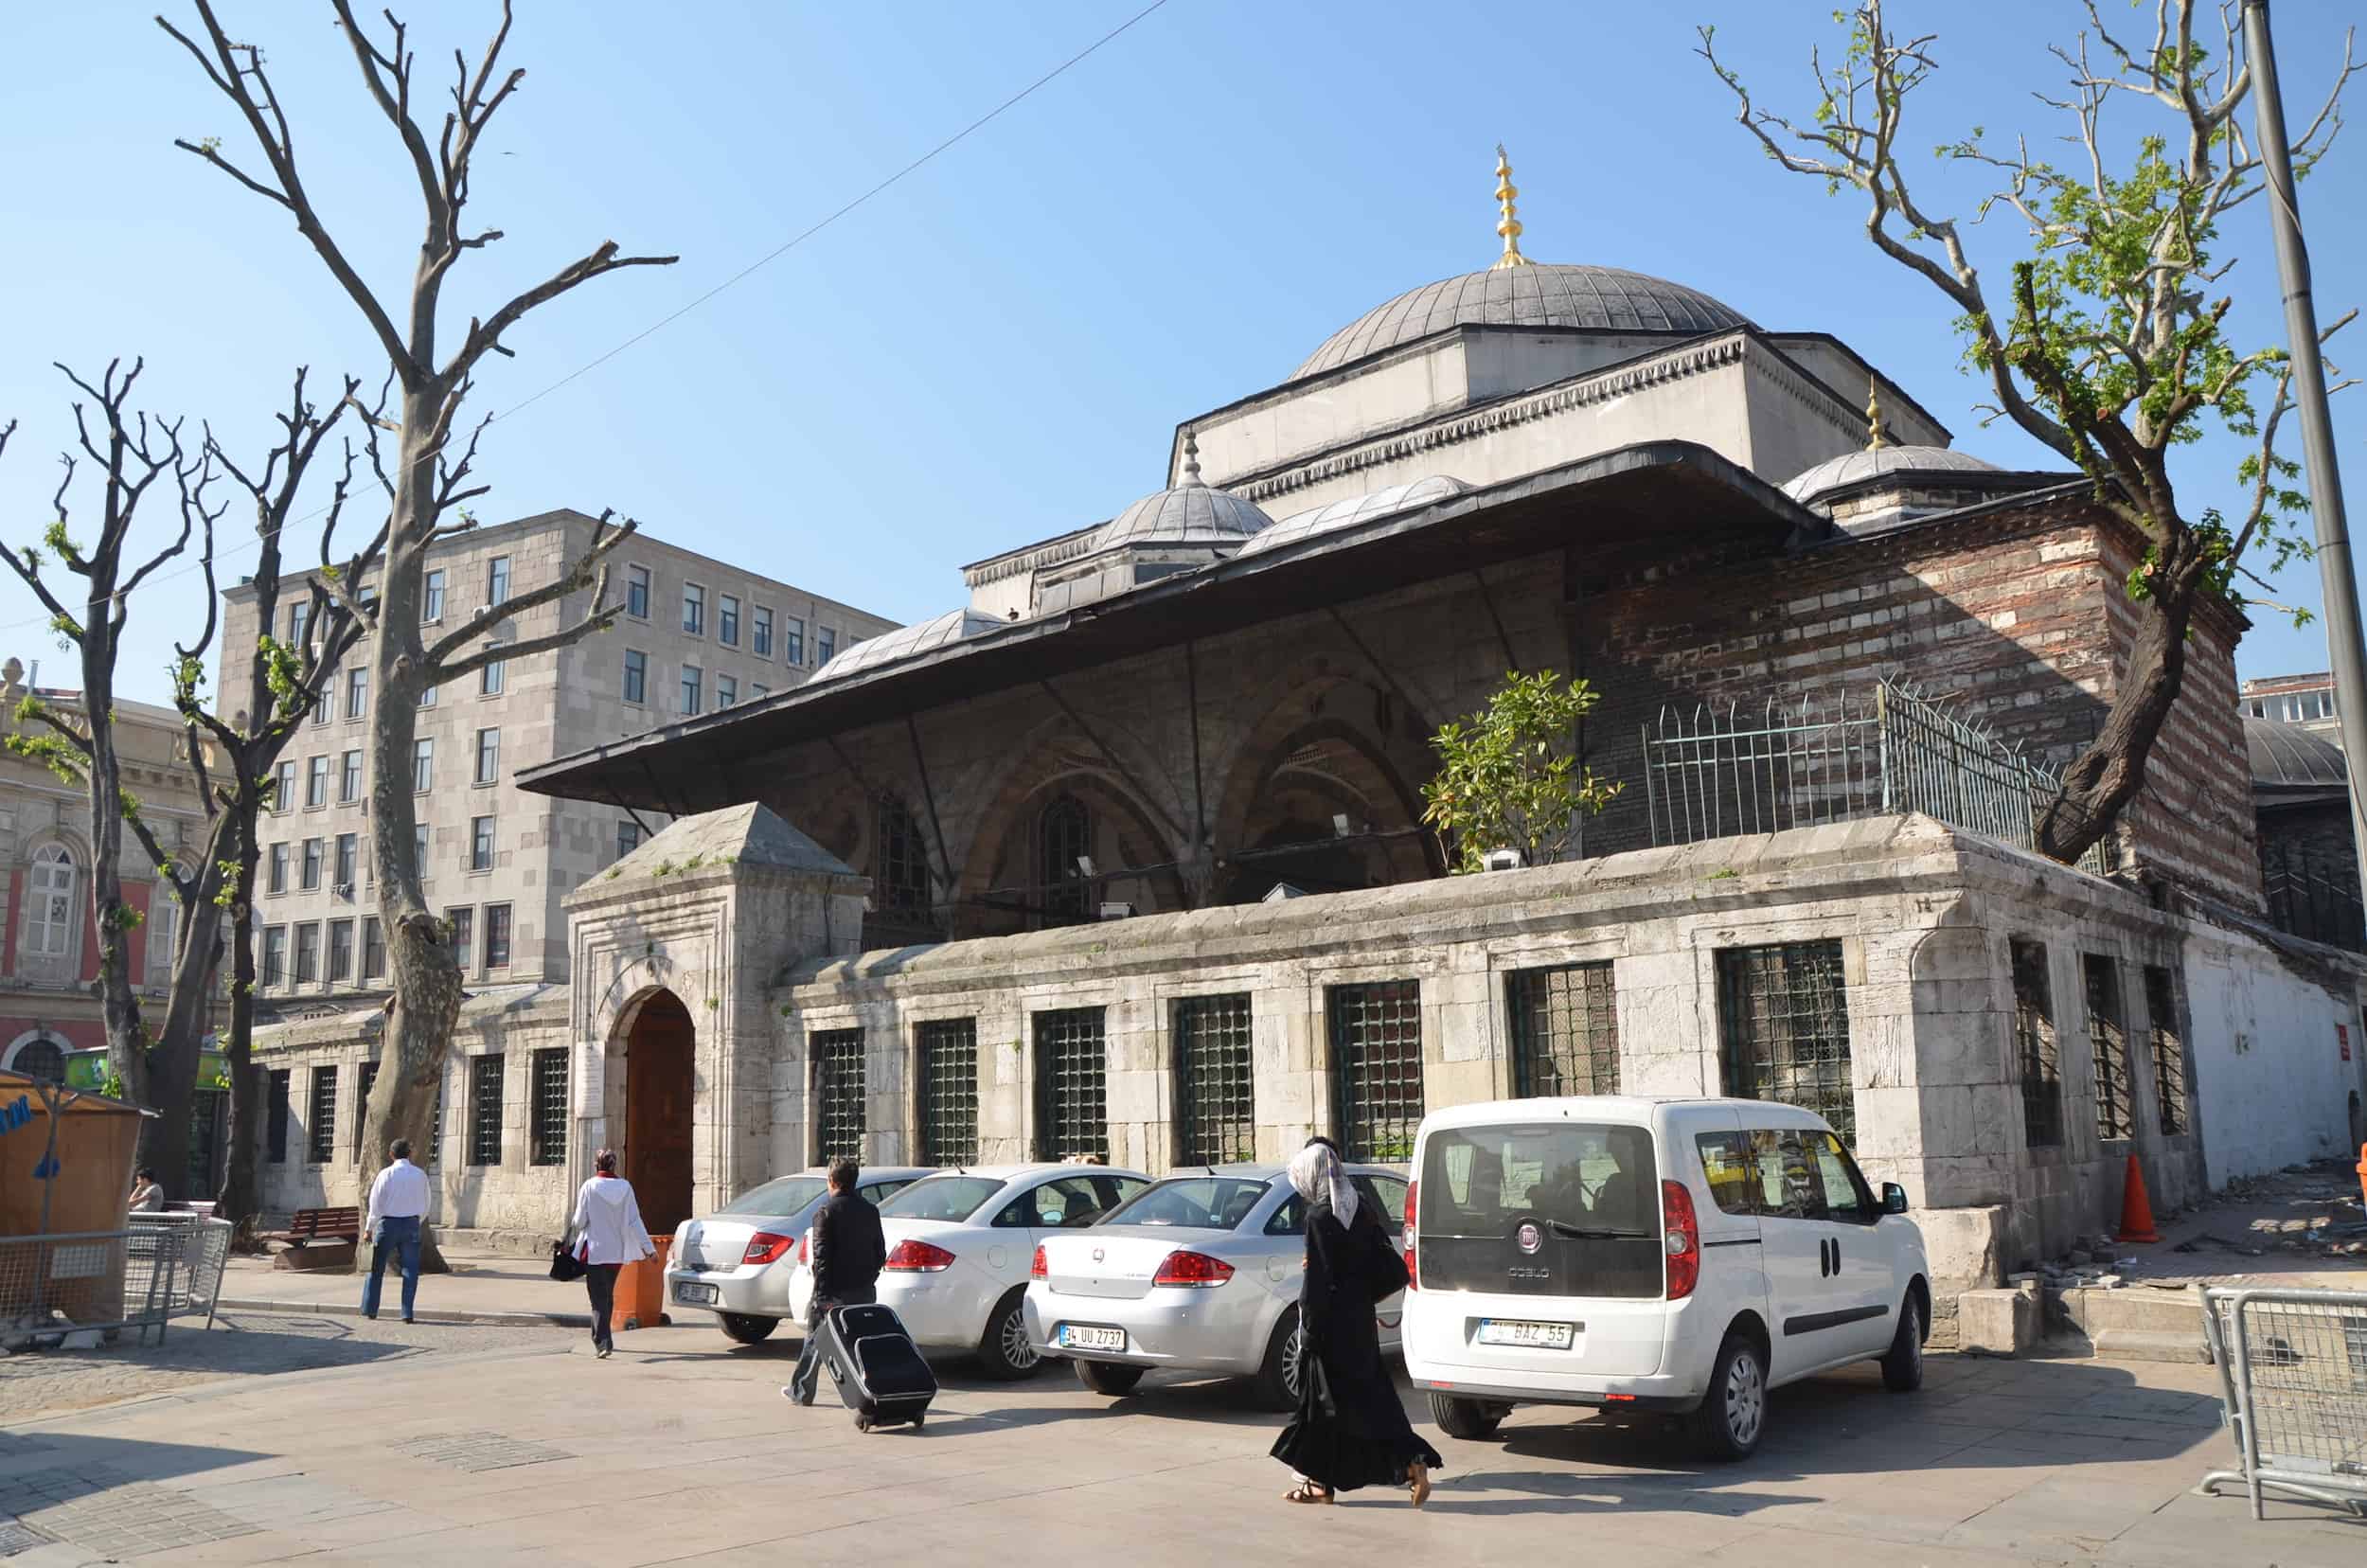 Tomb of Turhan Hatice Sultan at the New Mosque complex in Eminönü, Istanbul, Turkey